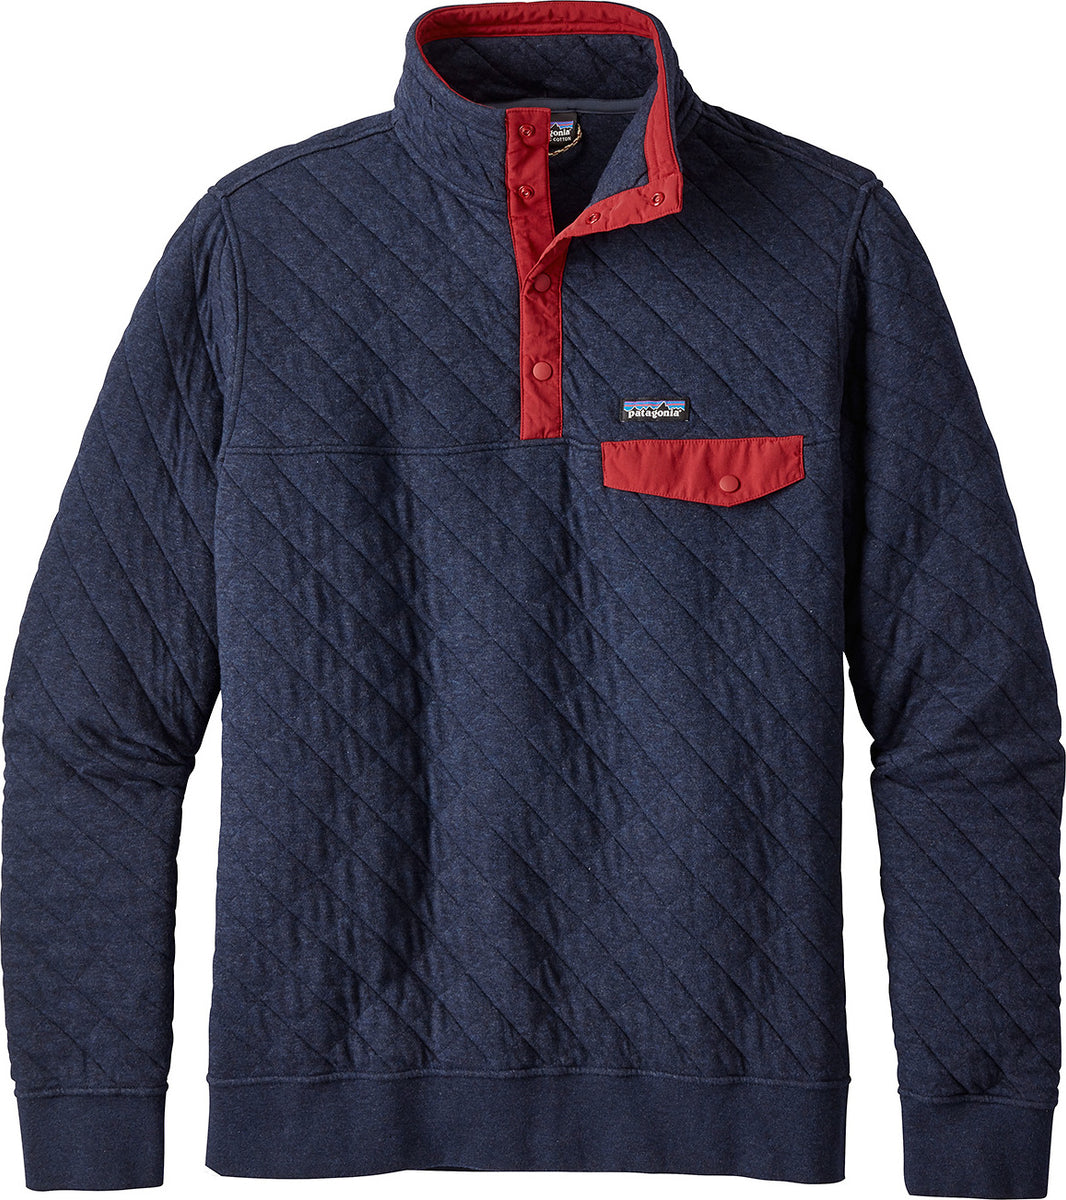 Review: the Patagonia Quilt Snap-T Pullover Got Me Hooked on the Brand